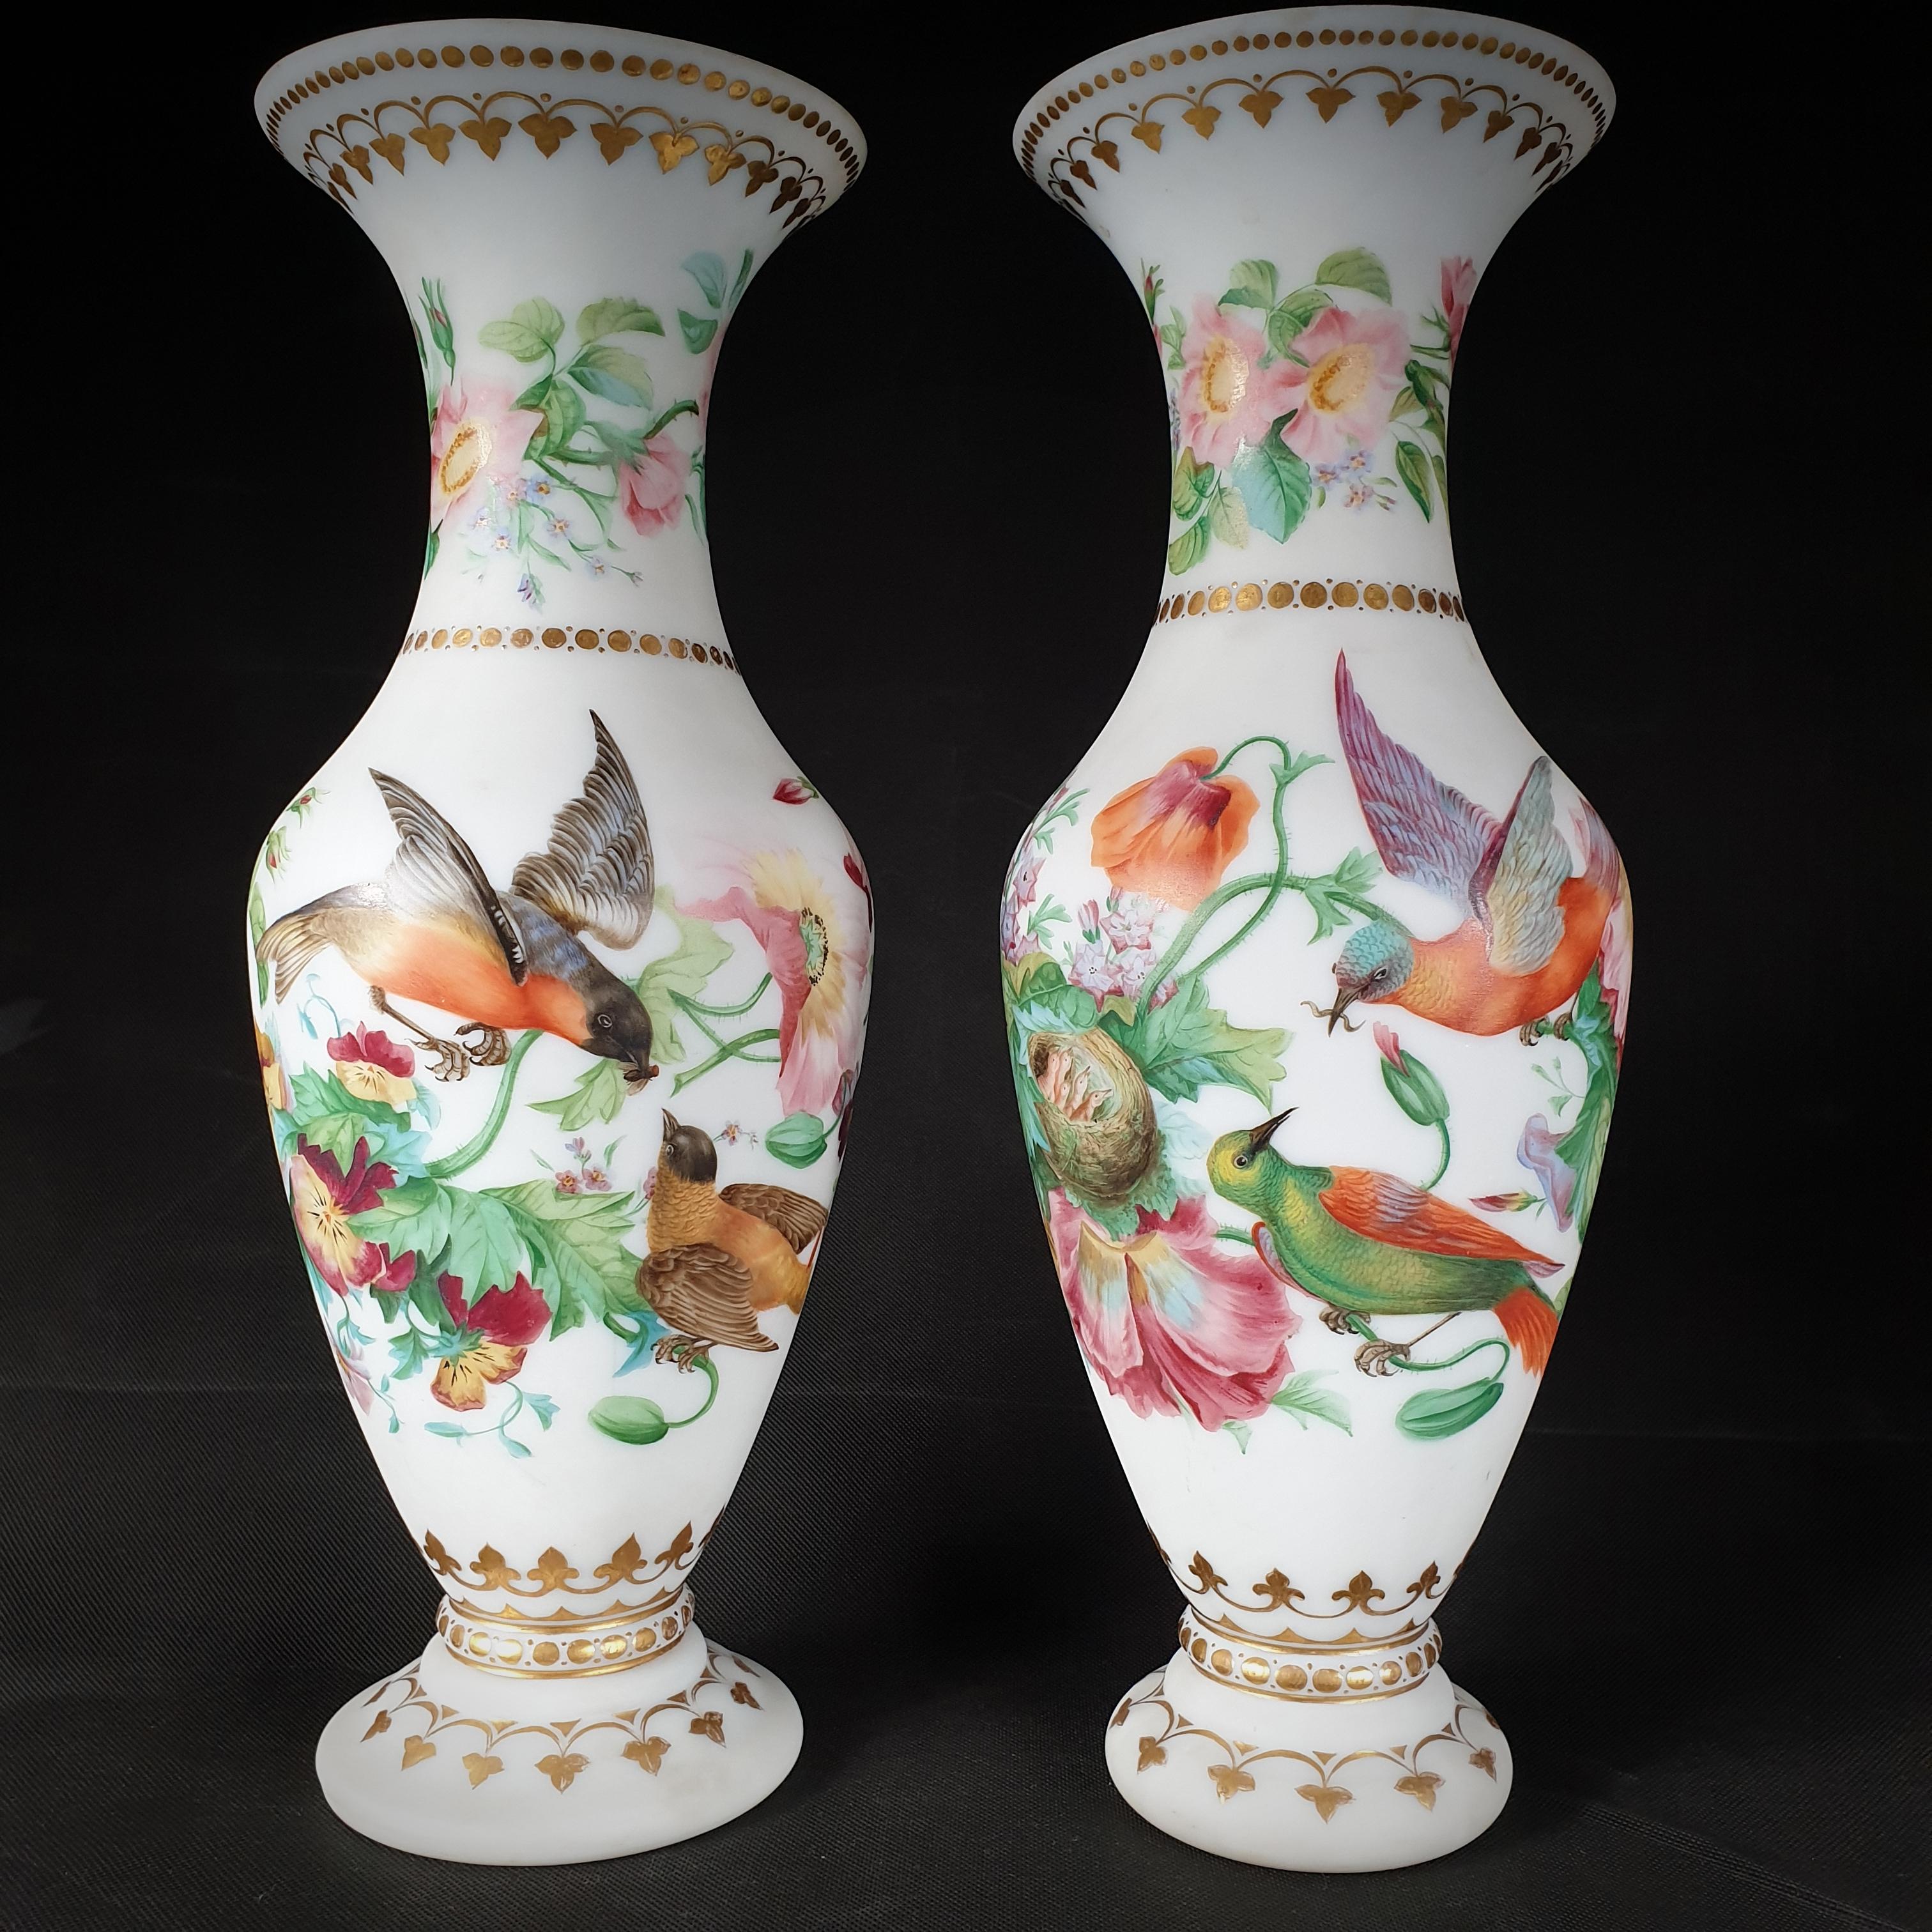 Pair of opaque trumpet-shaped opaline vases. Beautiful hand-painted floral patterns in a variety of colors and vibrant birds caring for the chicks and guarding their nest adorn this married pair. The corners and rims have subtle gold trim.
From